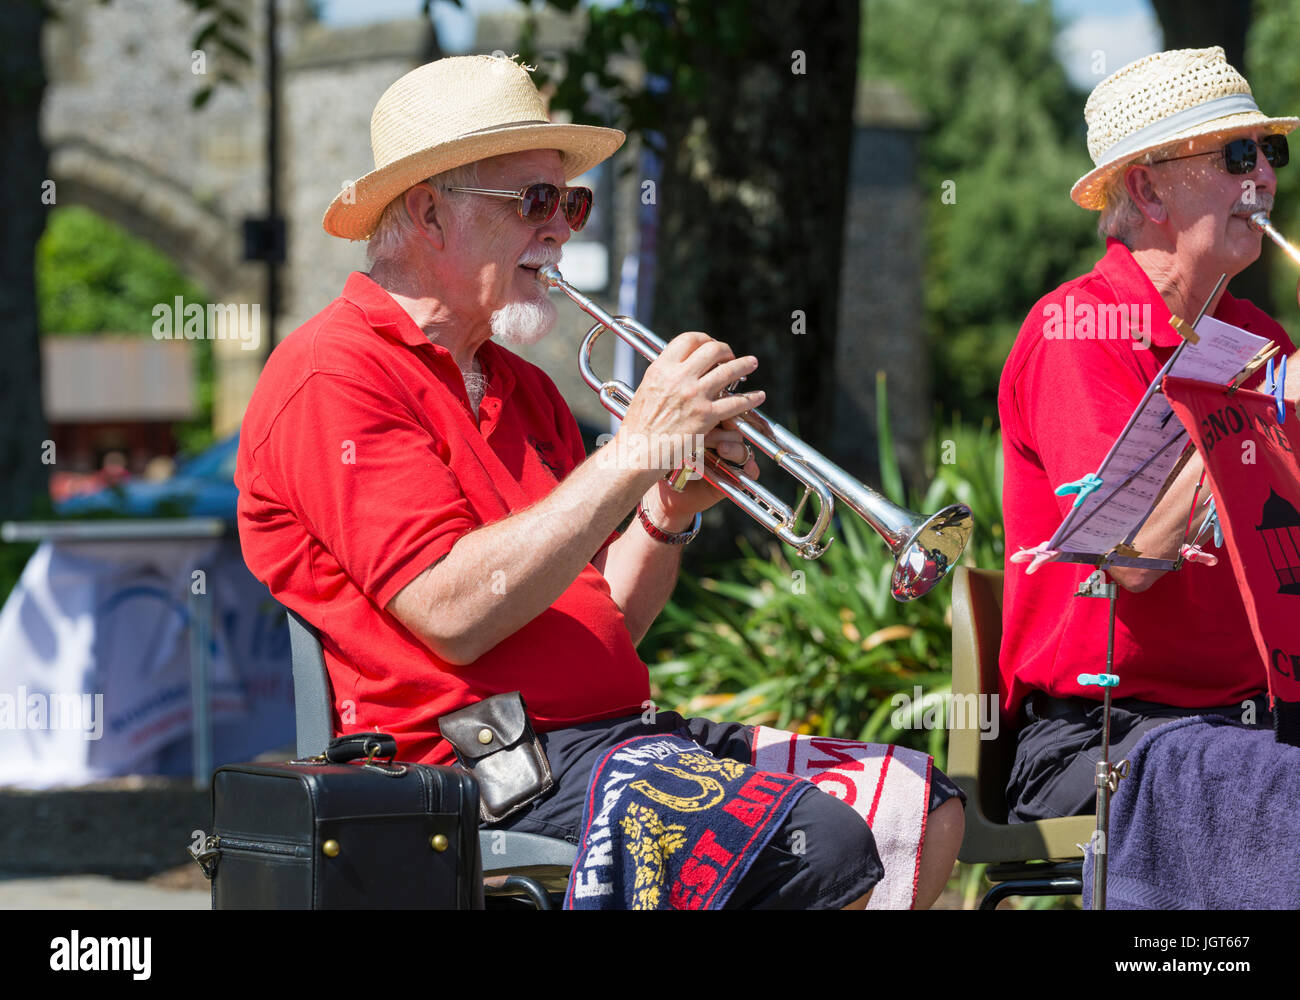 Trumpeter. Elderly man playing a flute with the Bognor Regis Concert Band at a Summer charity event. Stock Photo